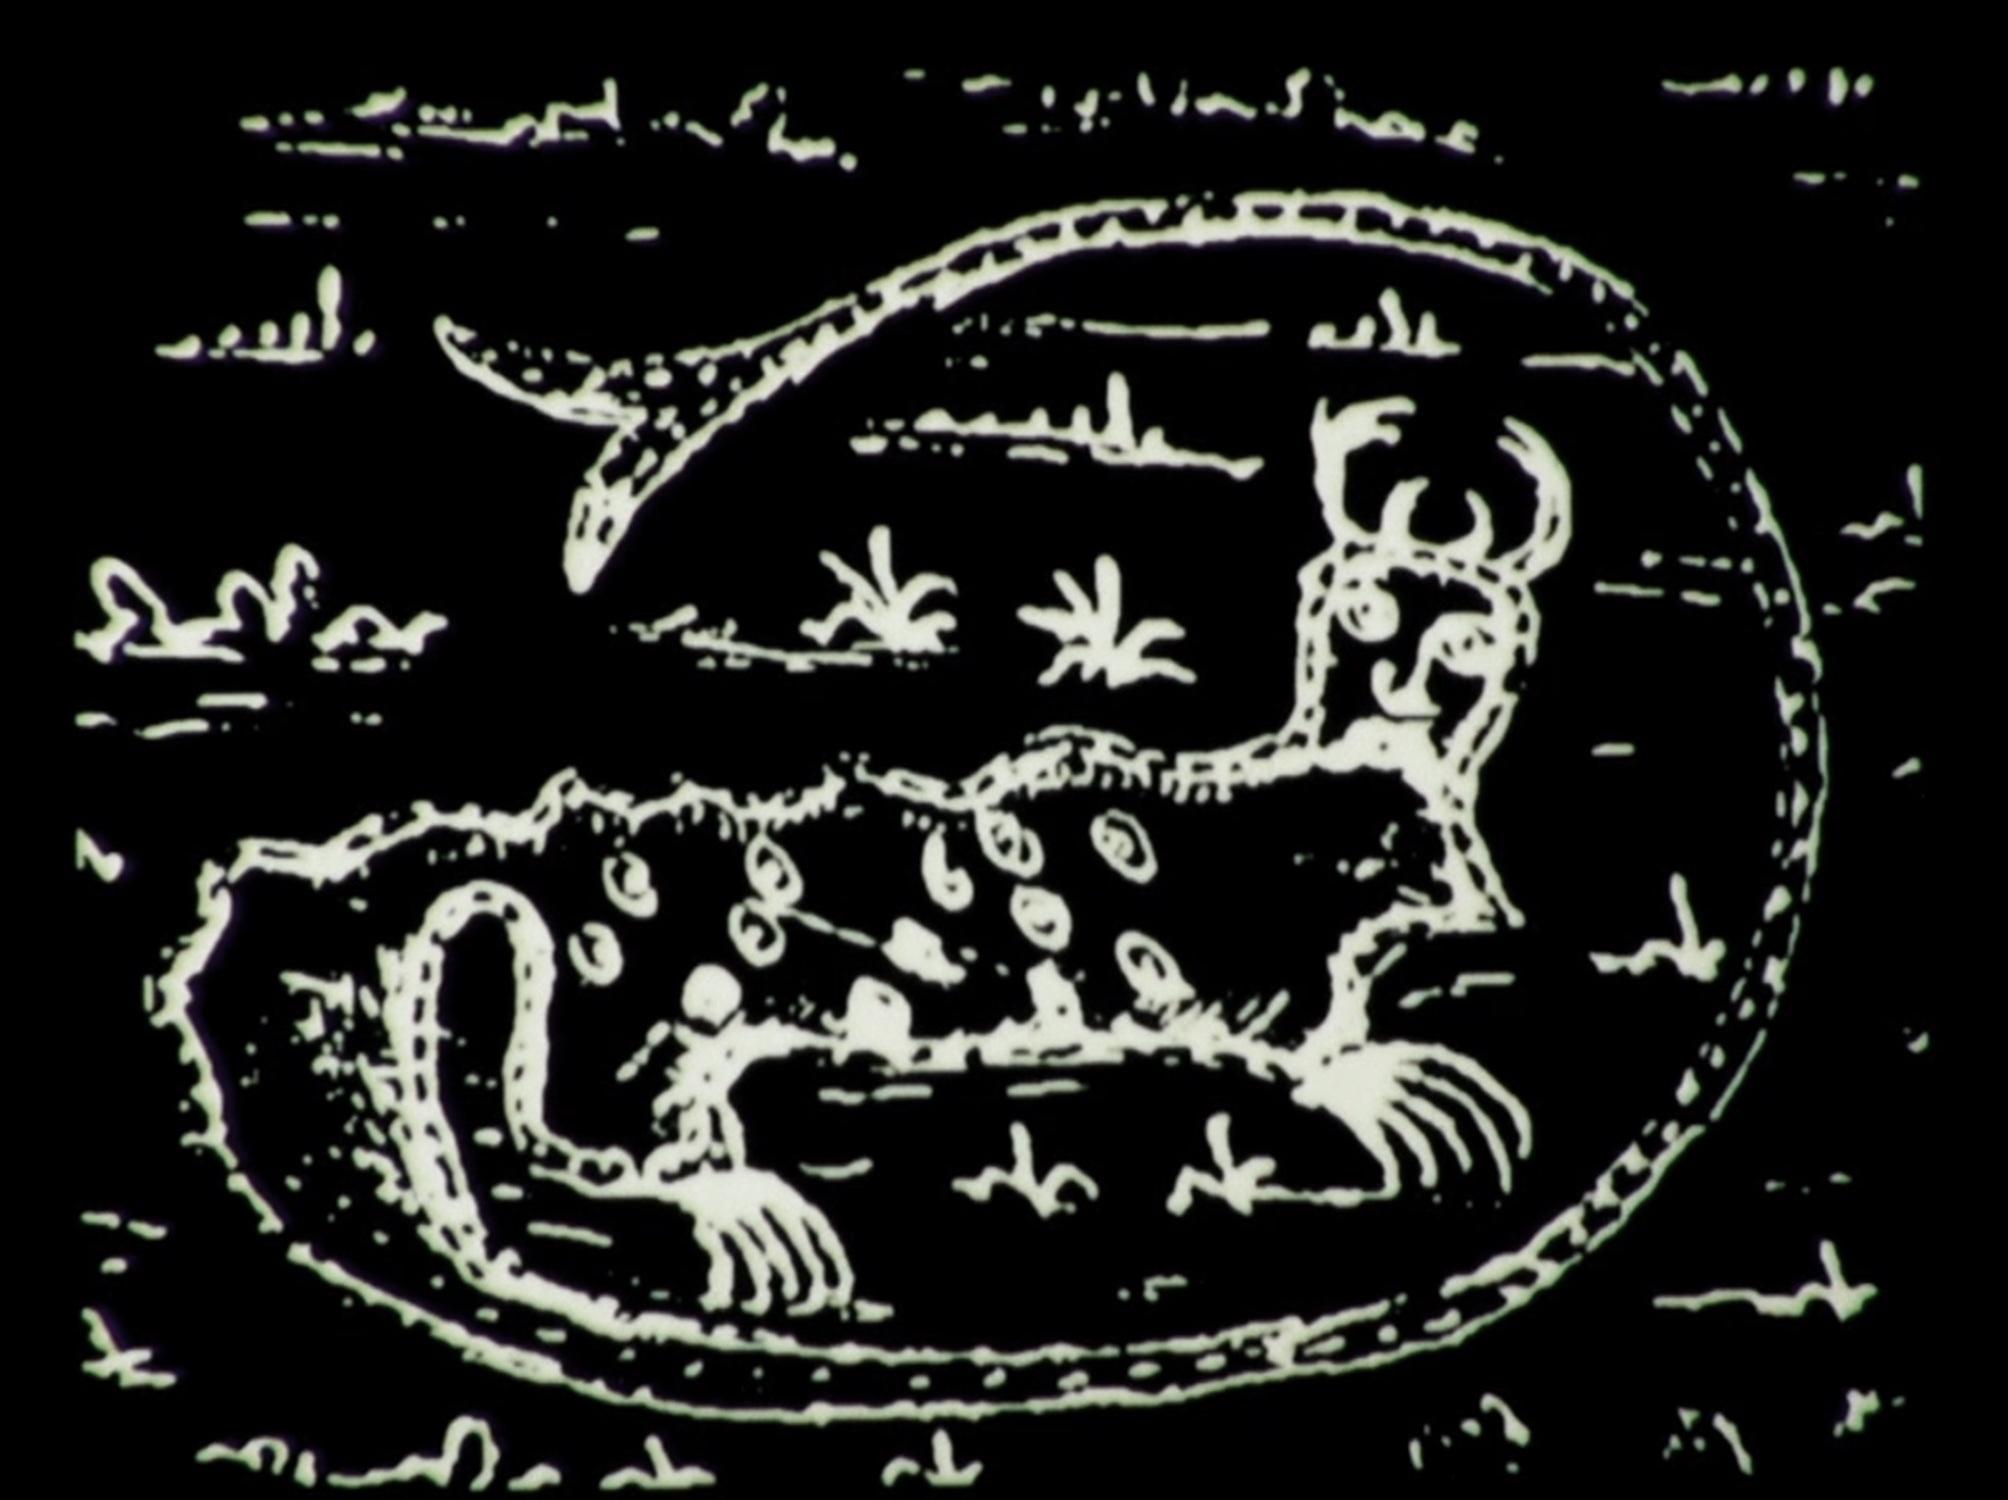 A serpent-like creature with horns, clawed feet, and a very long tail, bisected at its tip which wraps around the creature itself, stands on a black background.